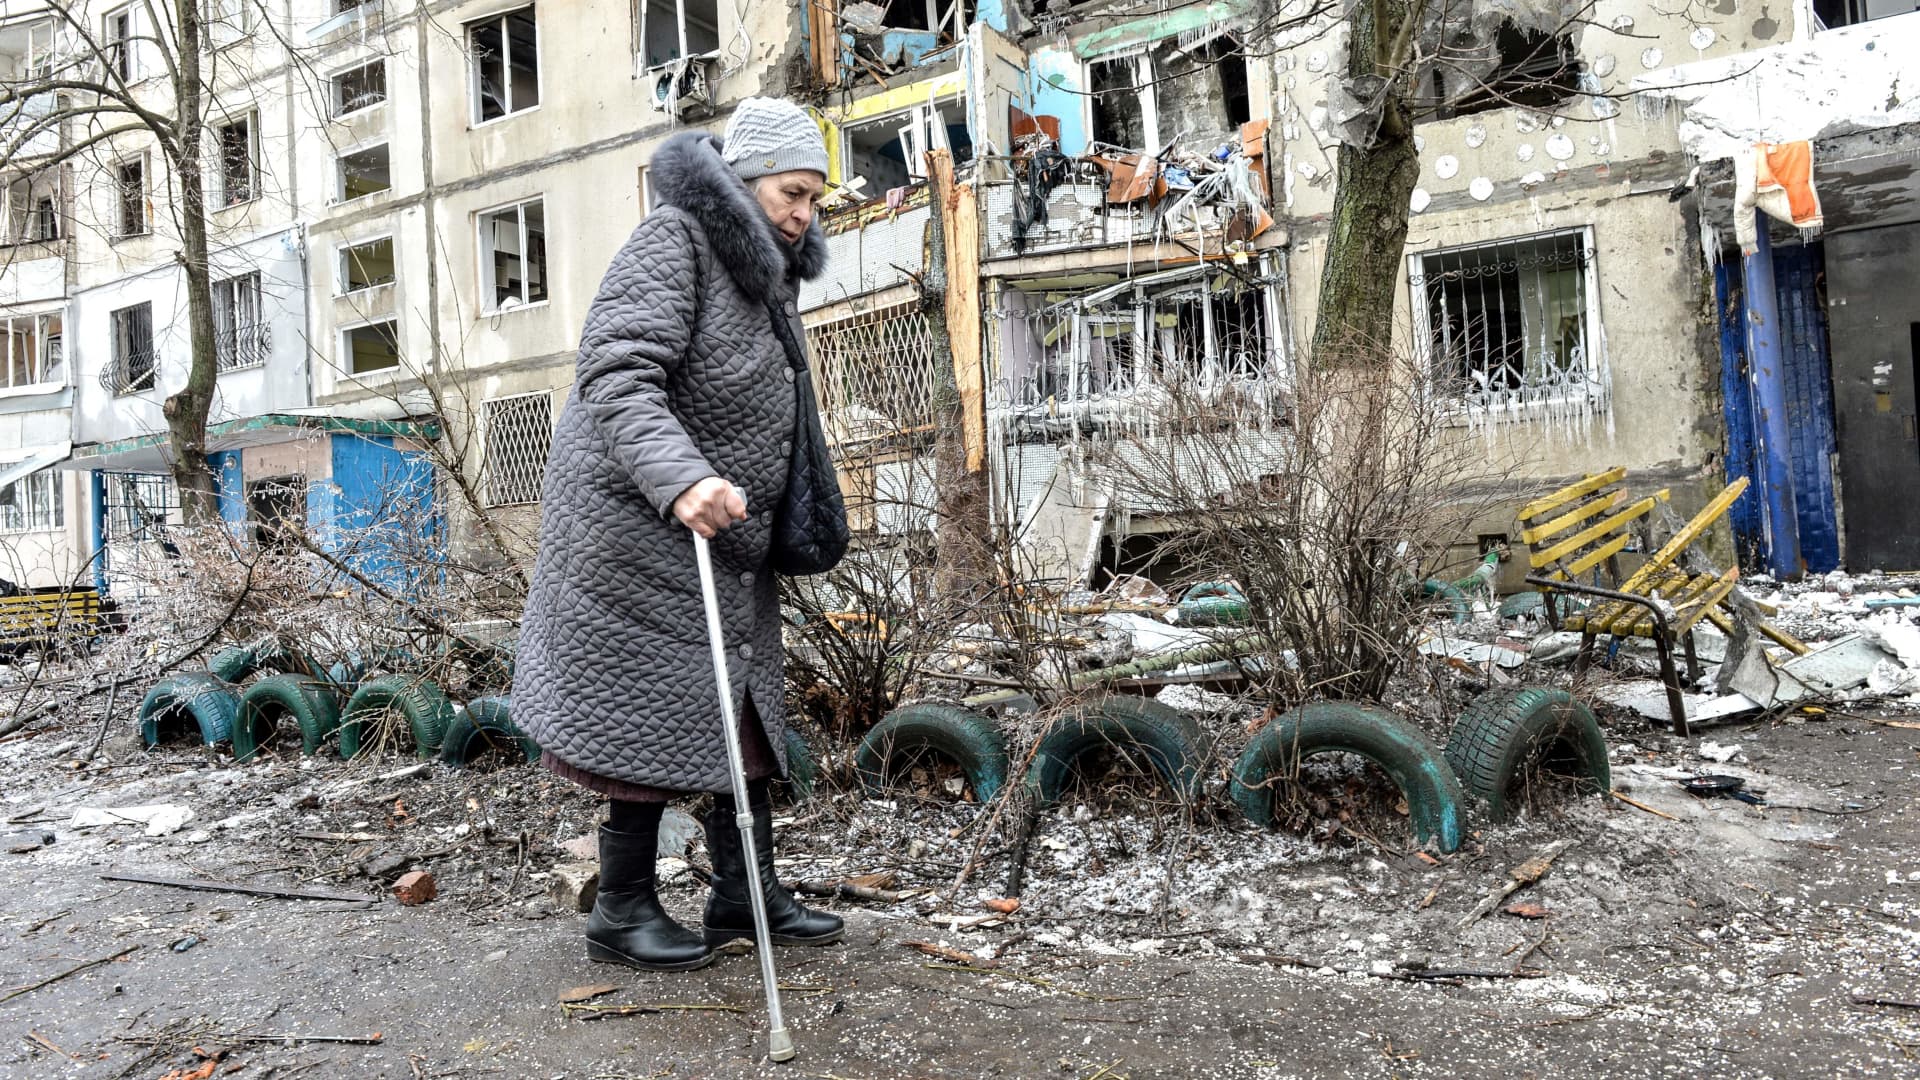 A woman walks by apartment building damaged after shelling the day before in Ukraine's second-biggest city of Kharkiv on March 8, 2022.